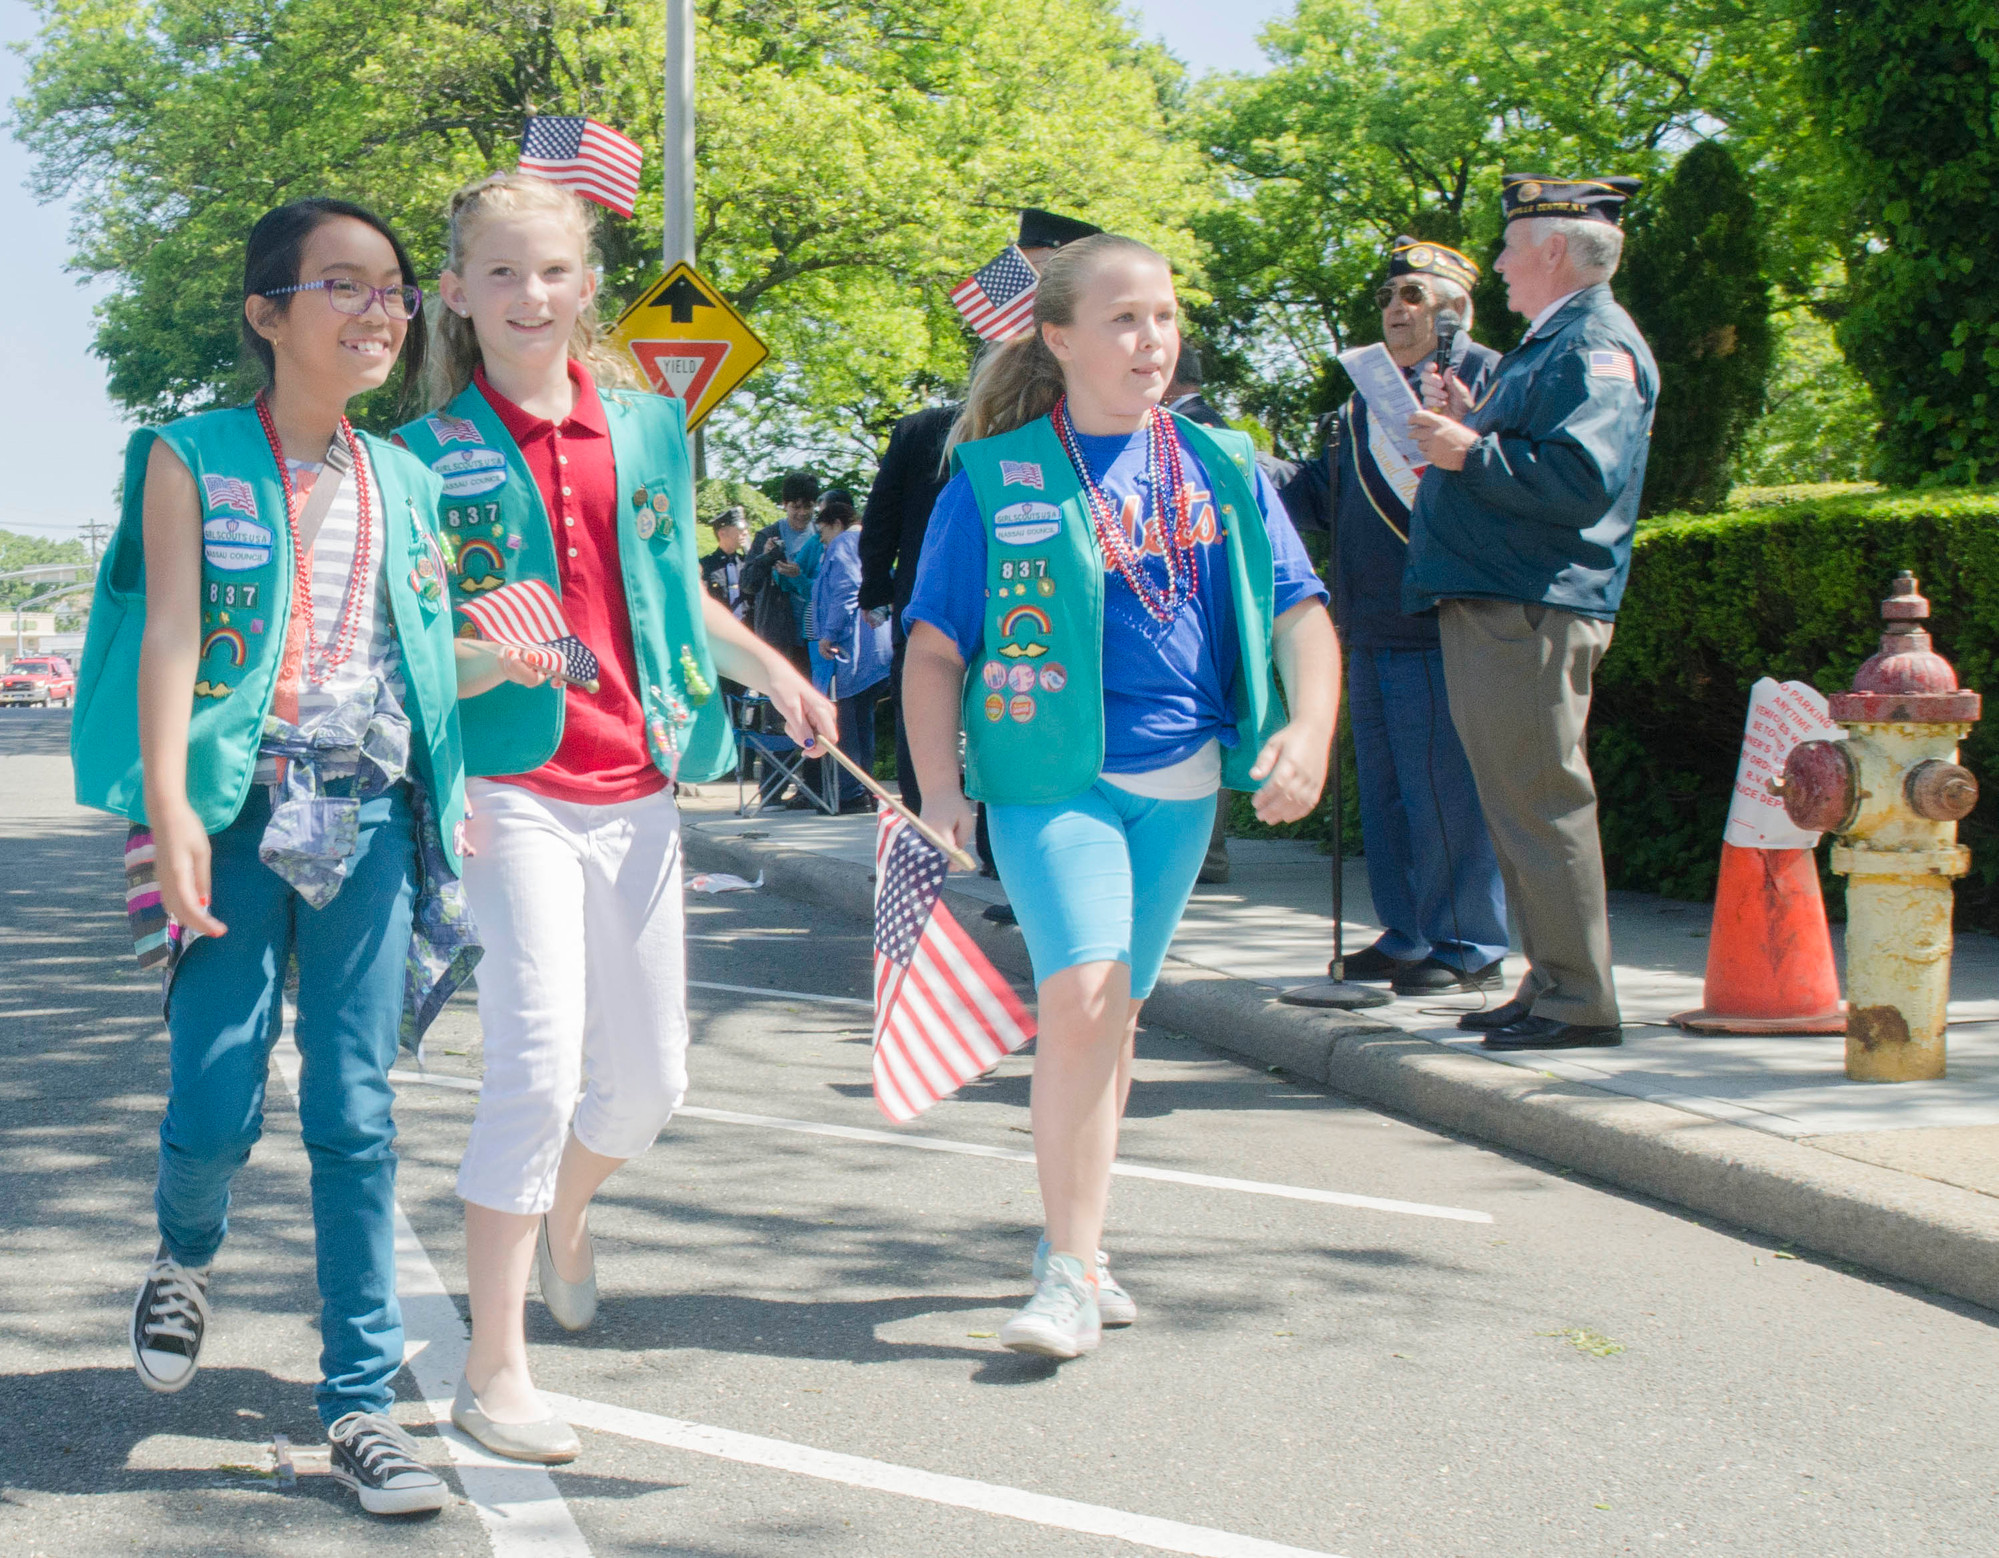 Girl Scouts showed their spirit in the Memorial Day Parade.